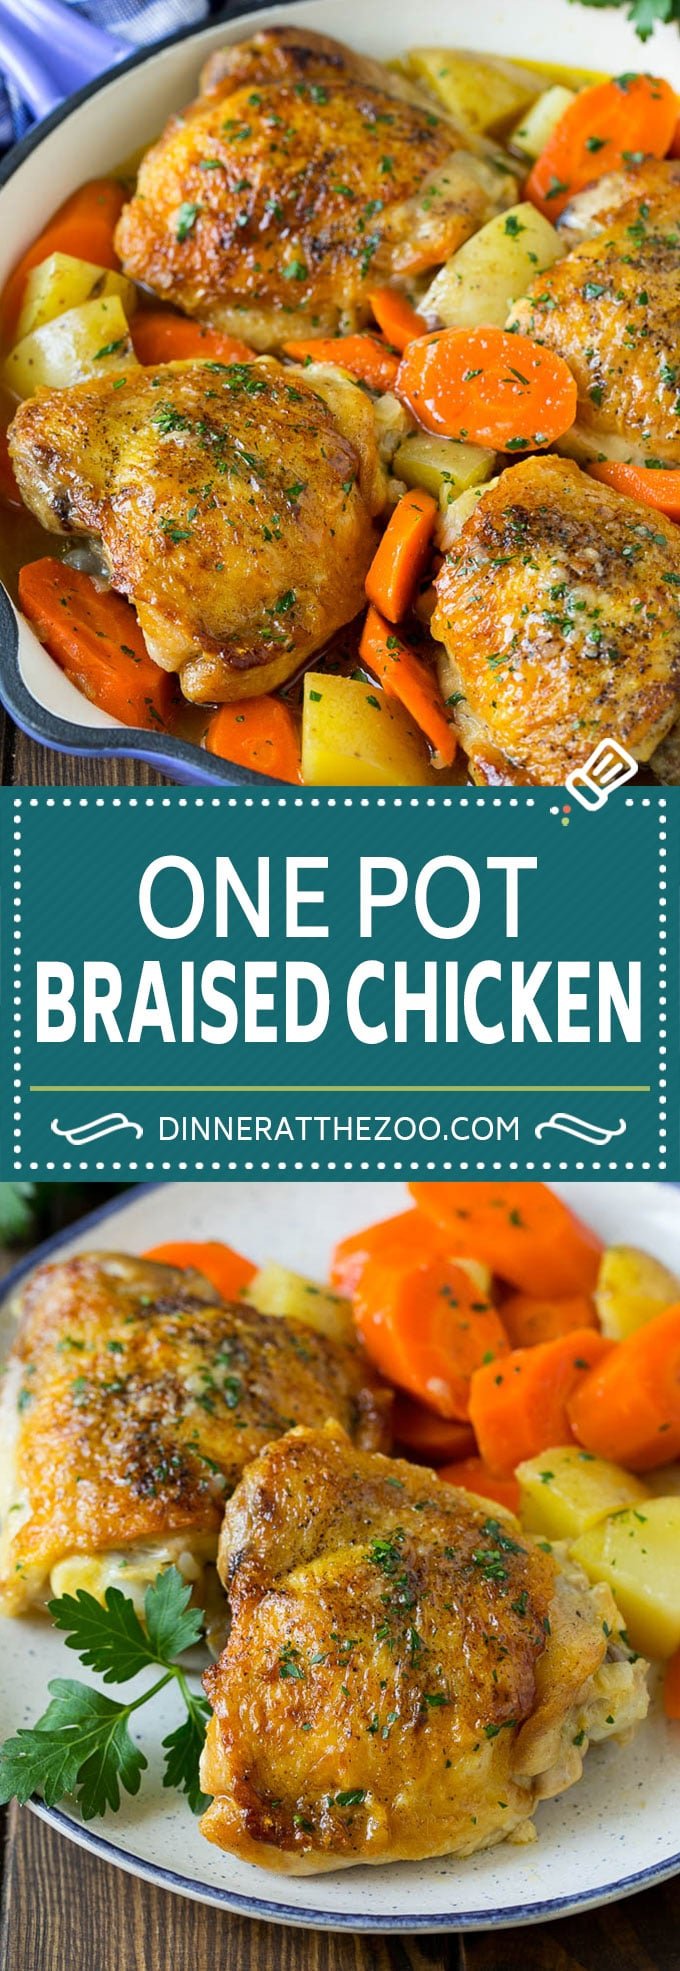 Braised Chicken with Carrots and Potatoes Recipe | One Pot Meal | Chicken with Potatoes #chicken #chickenthighs #onepot #potatoes #carrots #dinner #dinneratthezoo